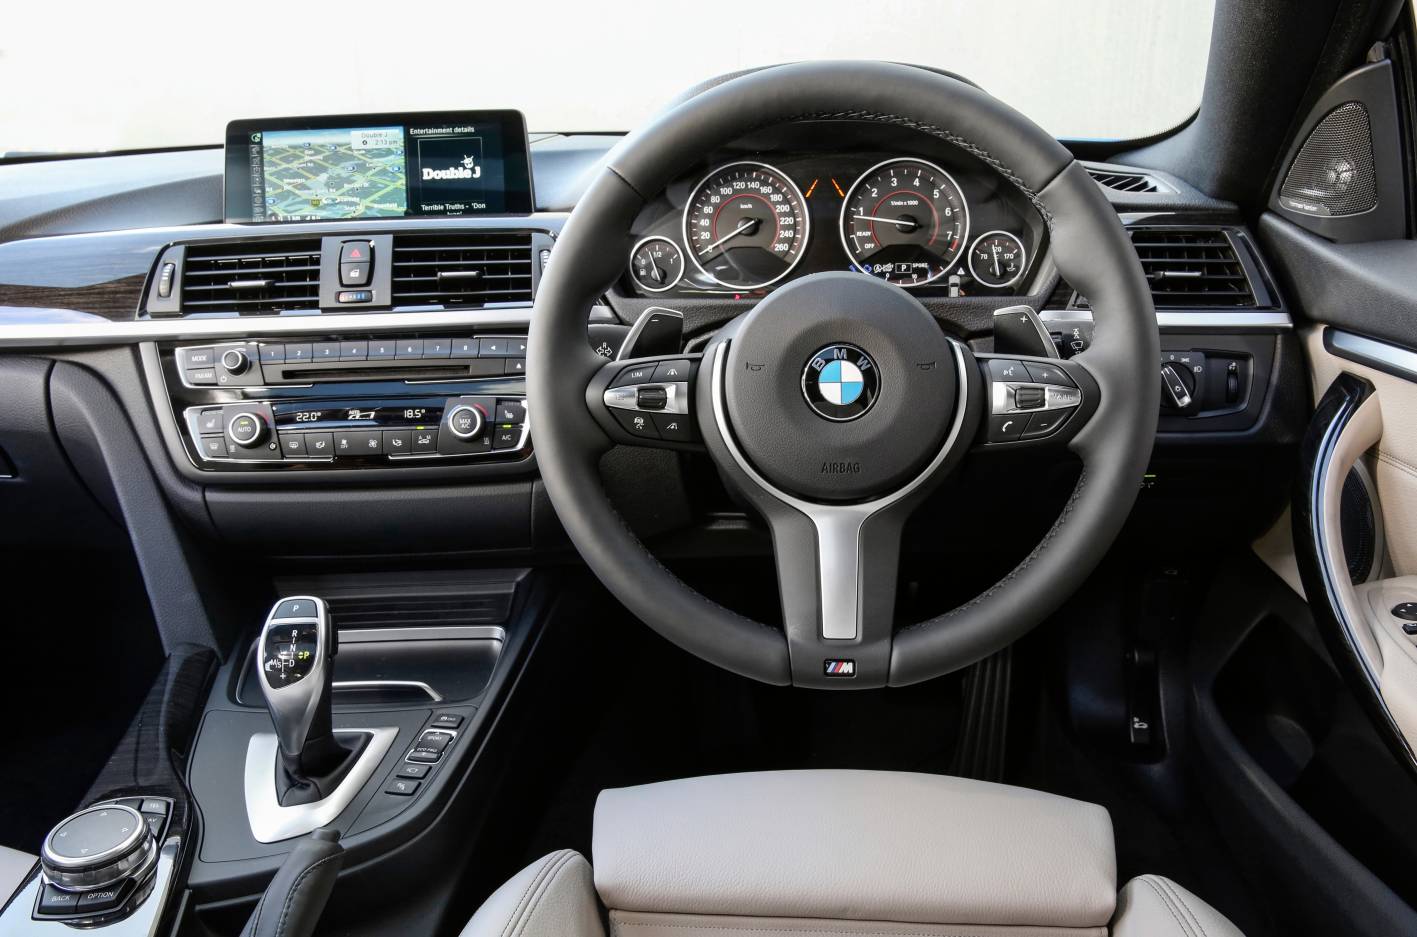 2016 BMW 4 Series on sale in Australia from $68,900, 440i added